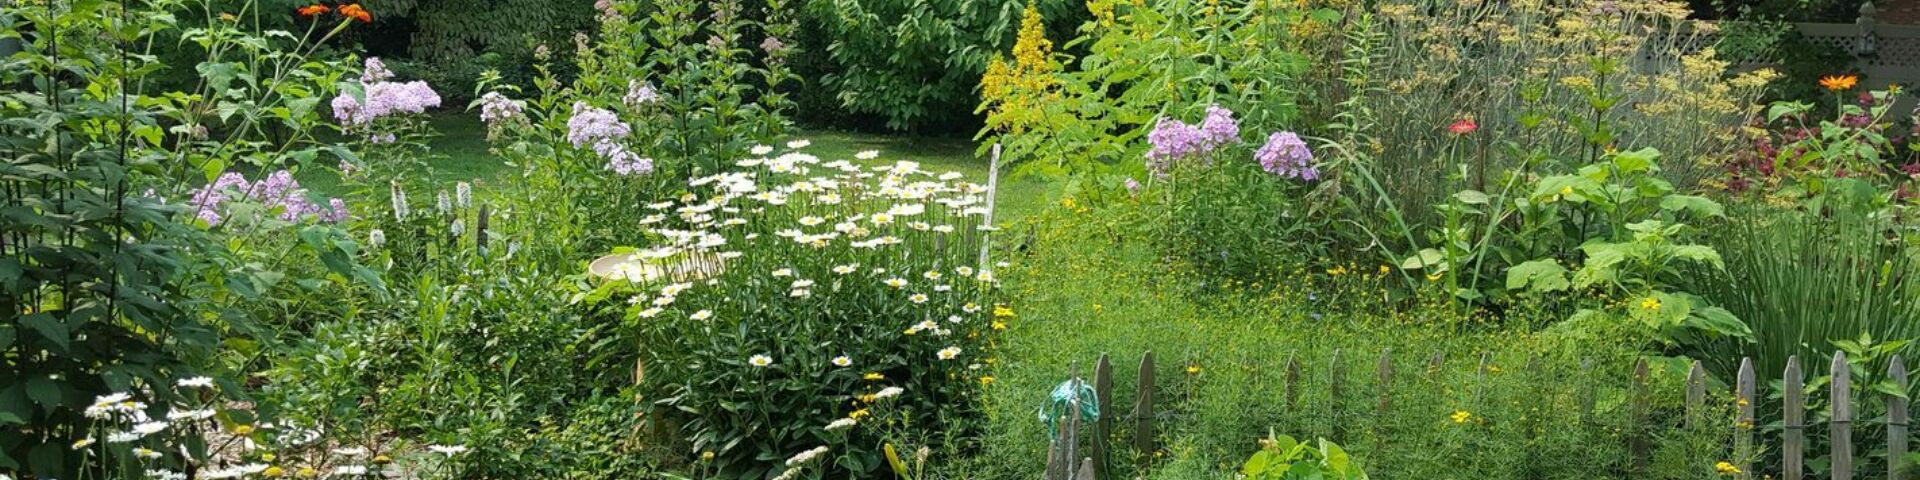 Beautiful, lush backyard pollinator garden with several species of tall native flowers.